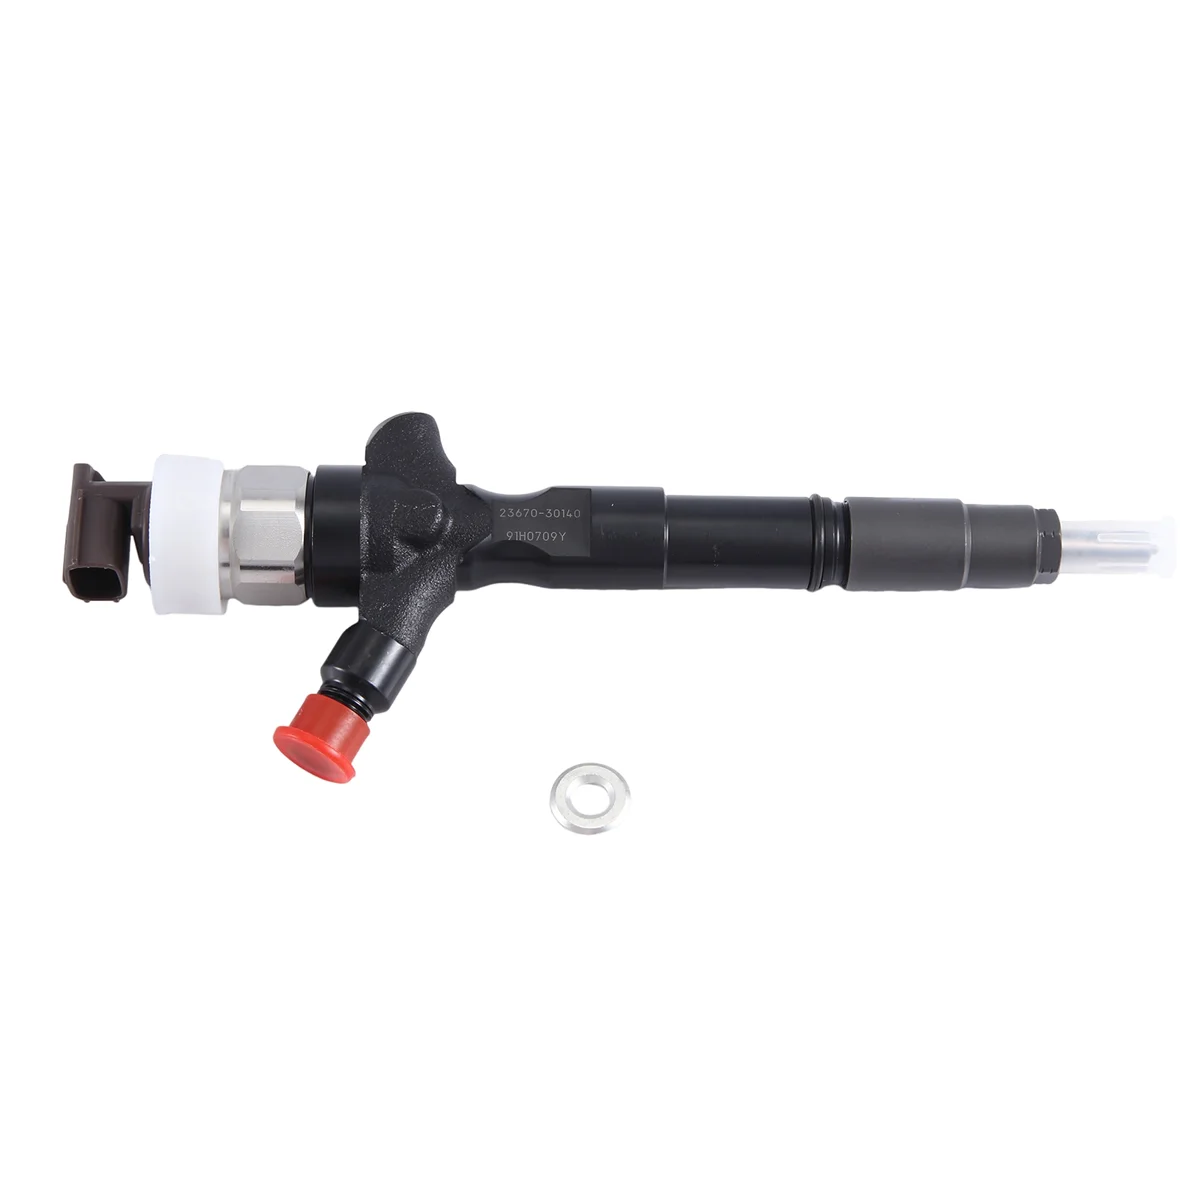 

095000-6760 23670-30140 New Diesel Fuel Injector Nozzle for Toyota Hilux